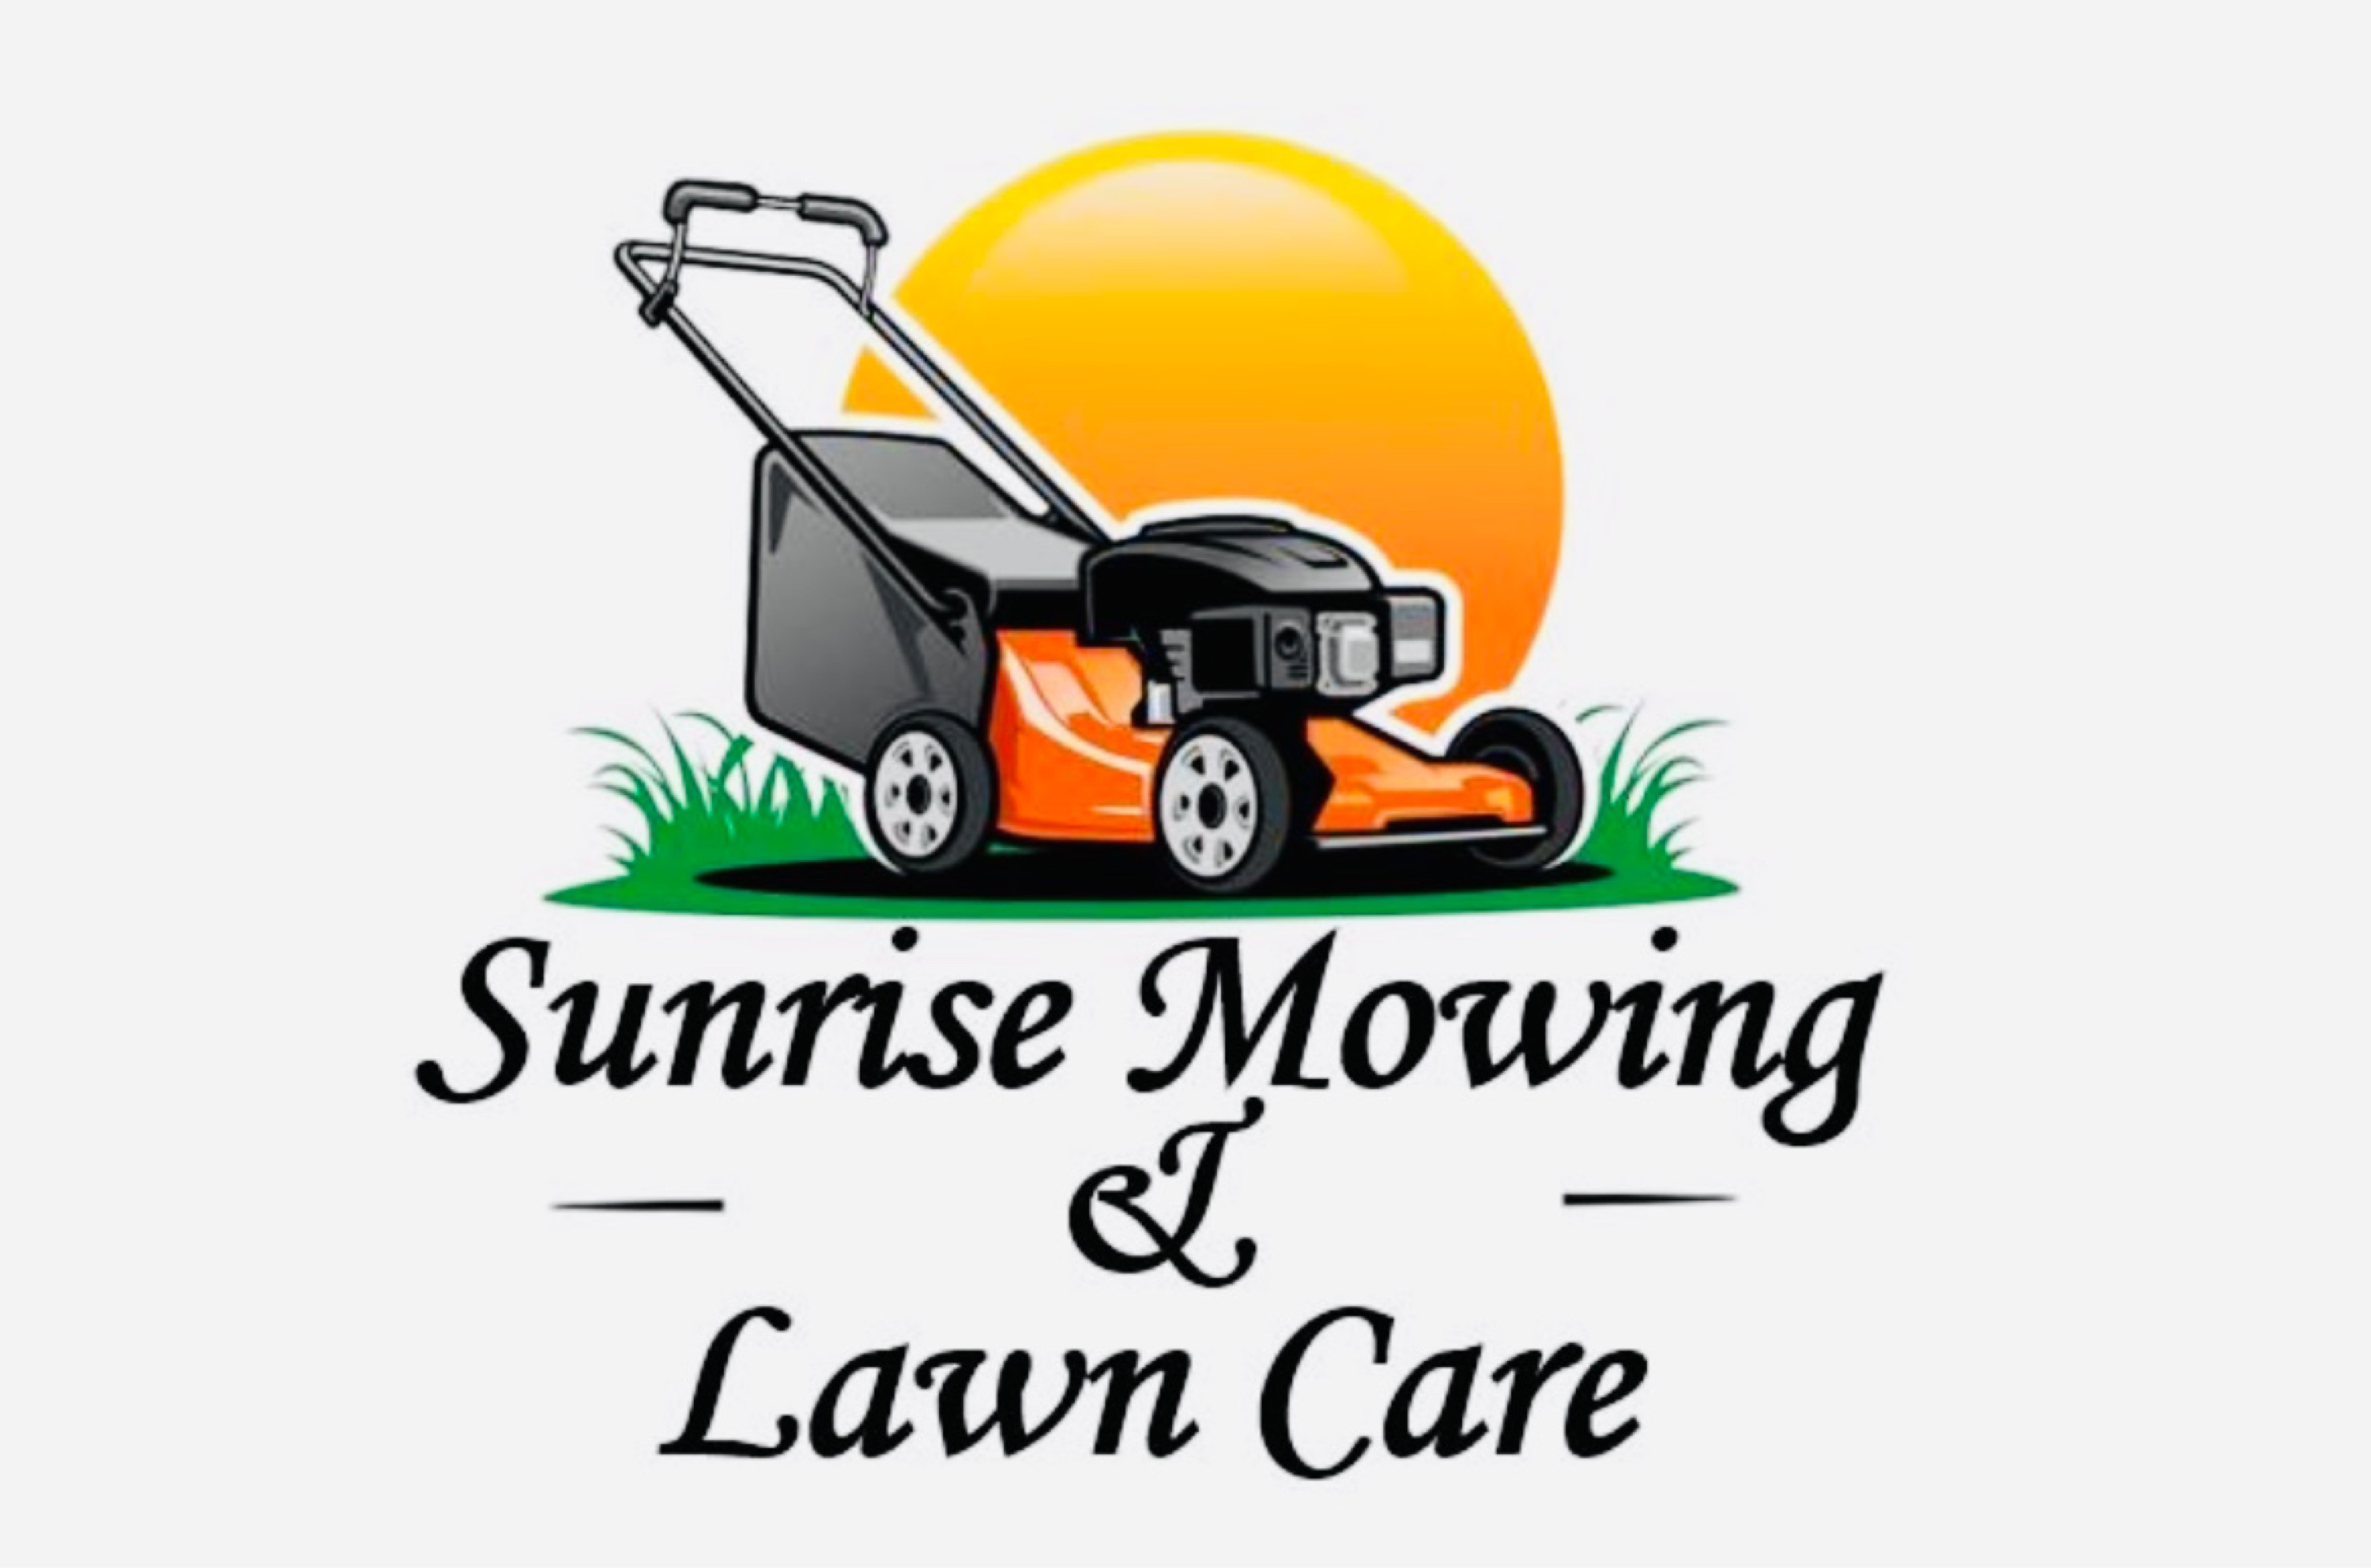 Sunrise Mowing & Lawn Care-Unlicensed Contractor Logo